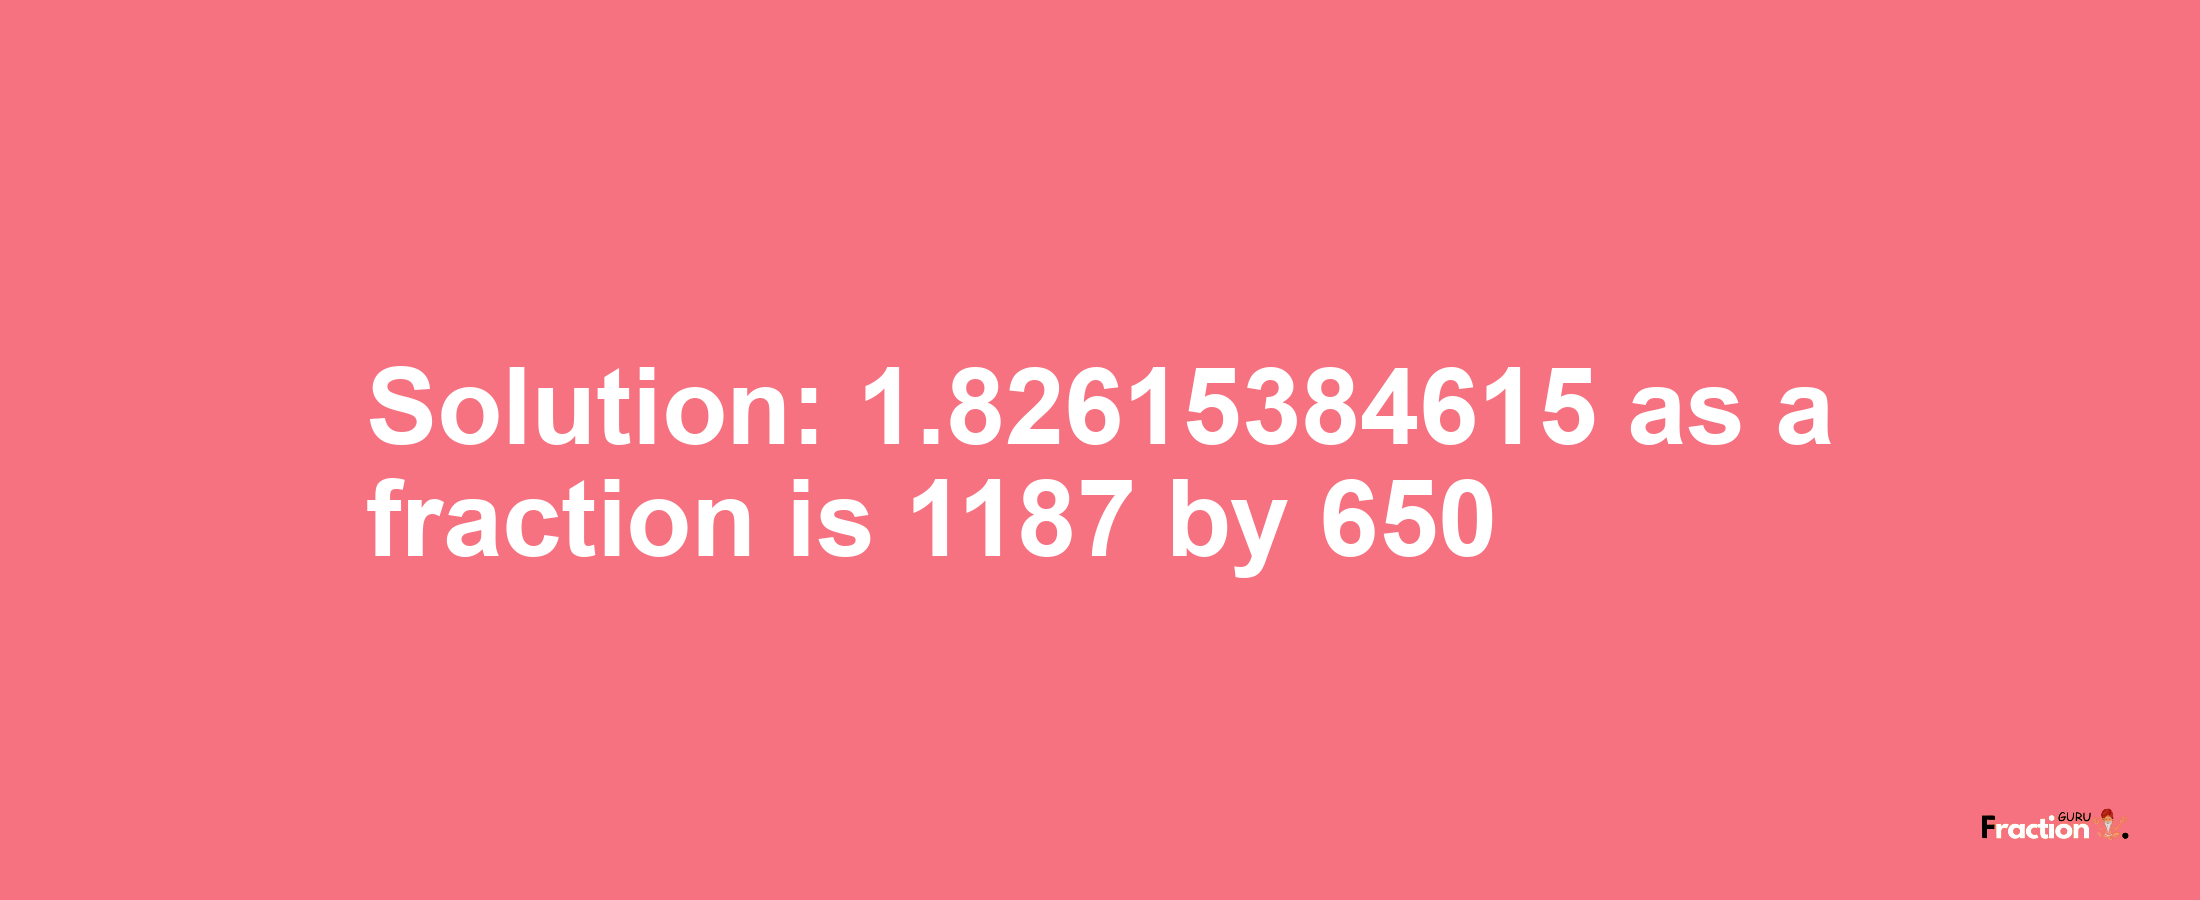 Solution:1.82615384615 as a fraction is 1187/650